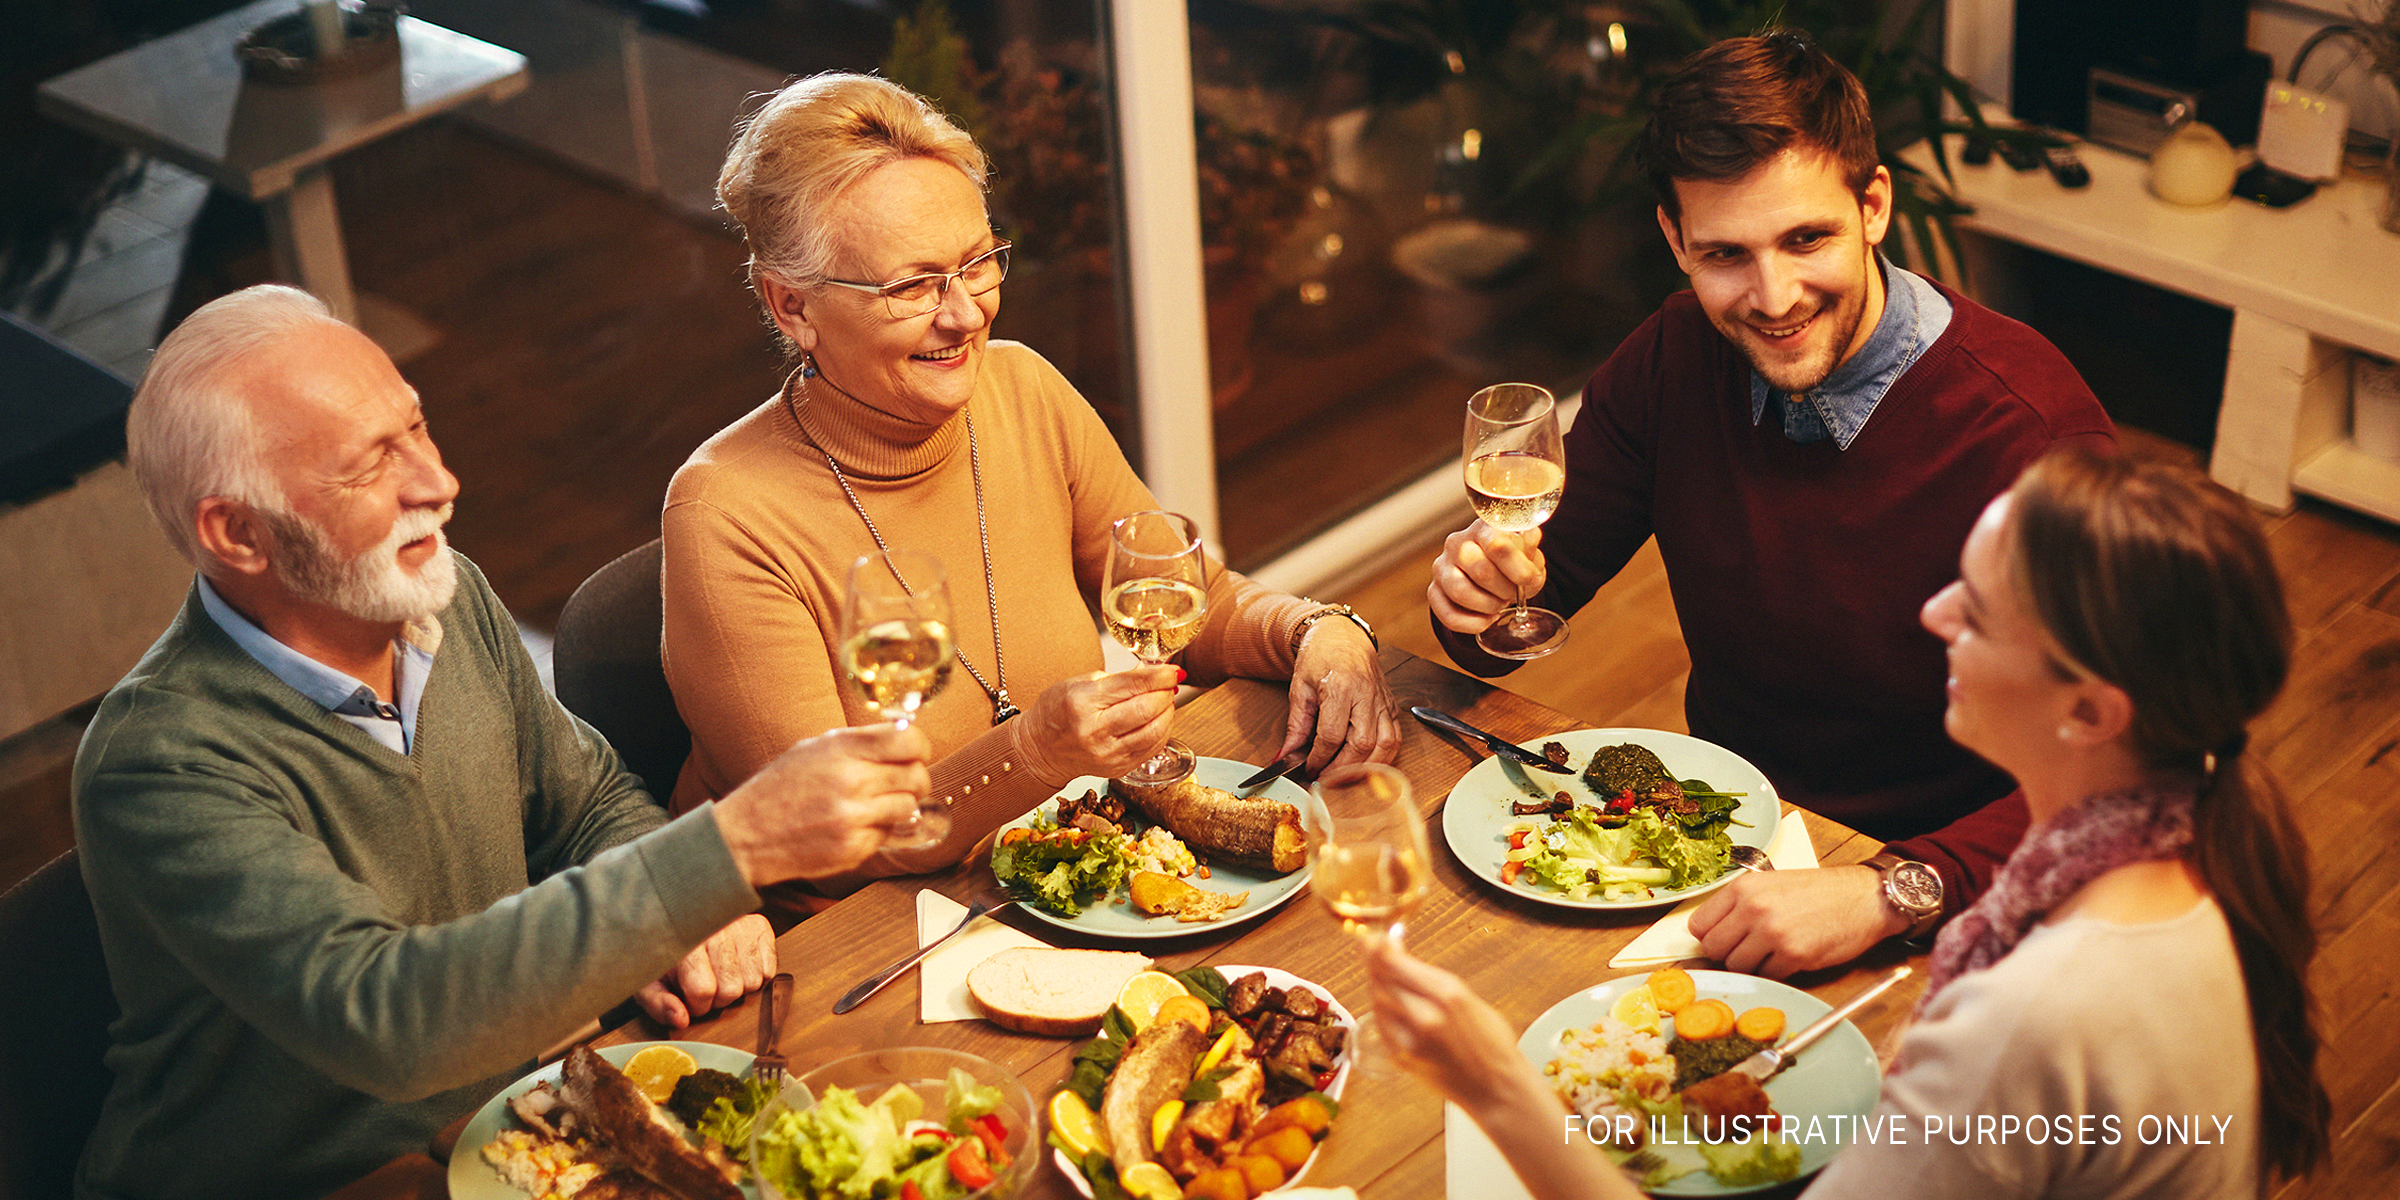 A happy family sharing a toast over dinner | Source: Shutterstock